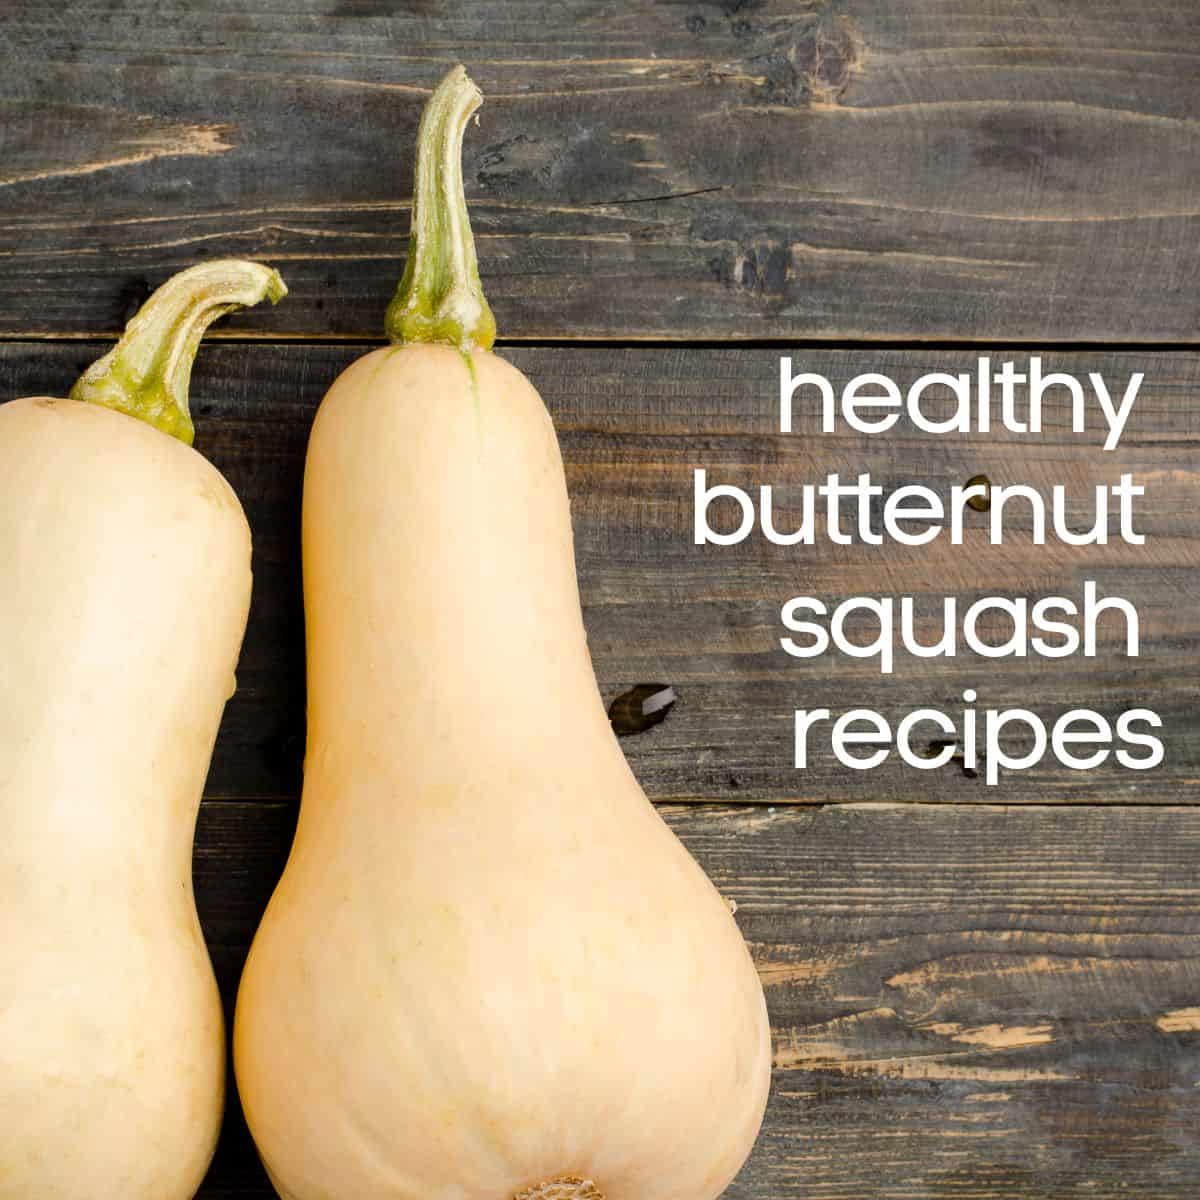 Image with text for healthy butternut squash recipes.